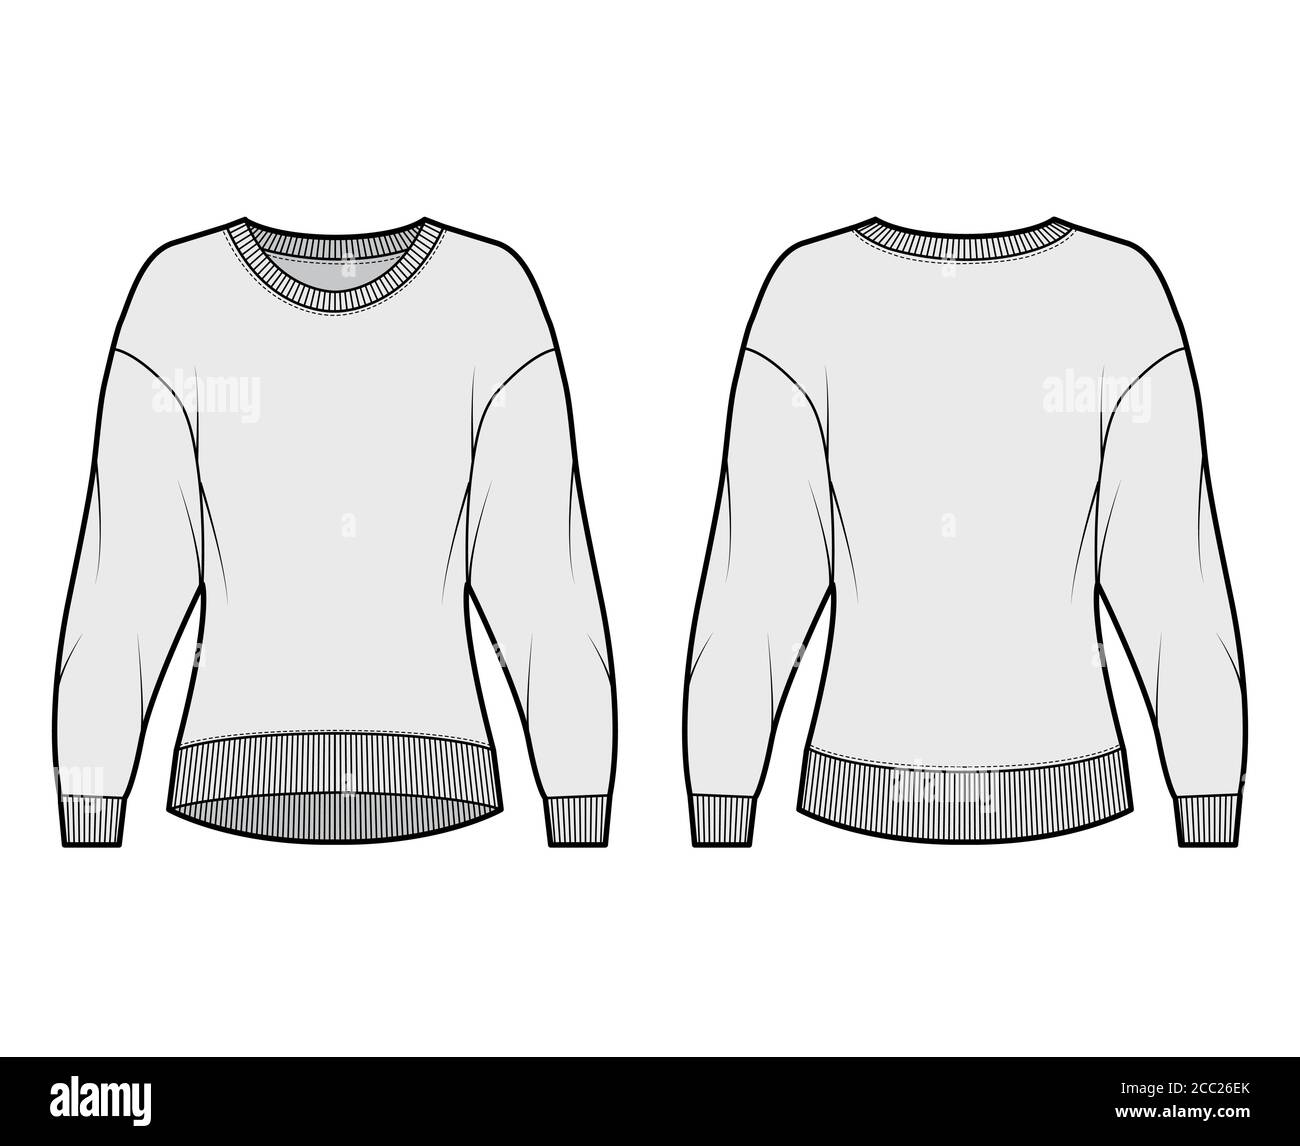 Cotton-terry sweatshirt technical fashion illustration with relaxed fit, crew neckline, long sleeves. Flat outwear jumper apparel template front, back, grey color. Women, men, unisex top CAD mockup Stock Vector